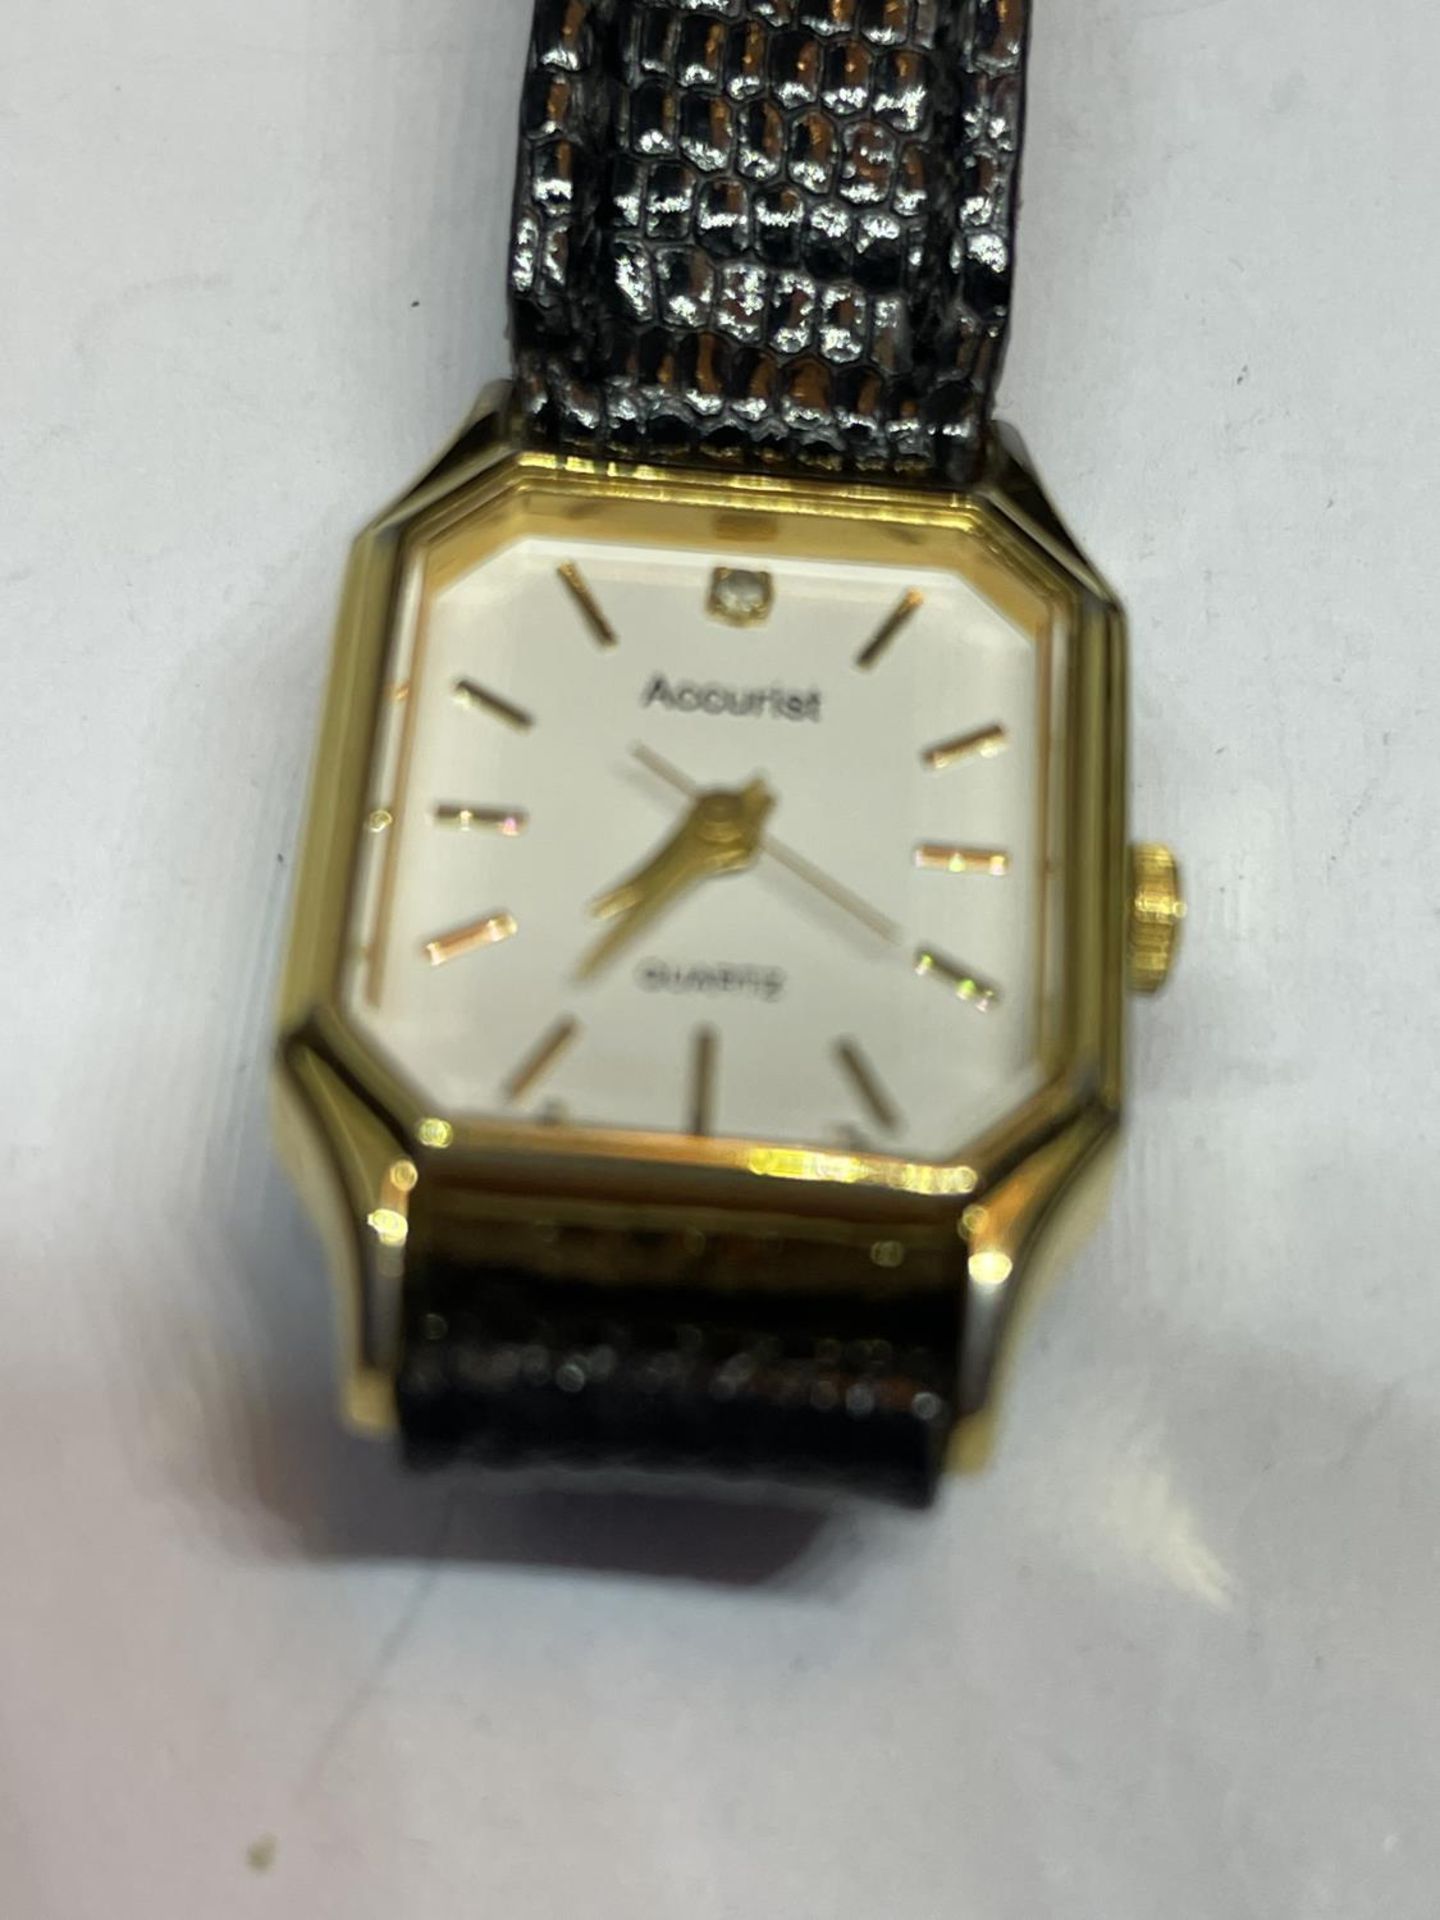 TWO ACCURIST WRIST WATCHES SEEN WORKING BUT NO WARRANTY - Image 2 of 3